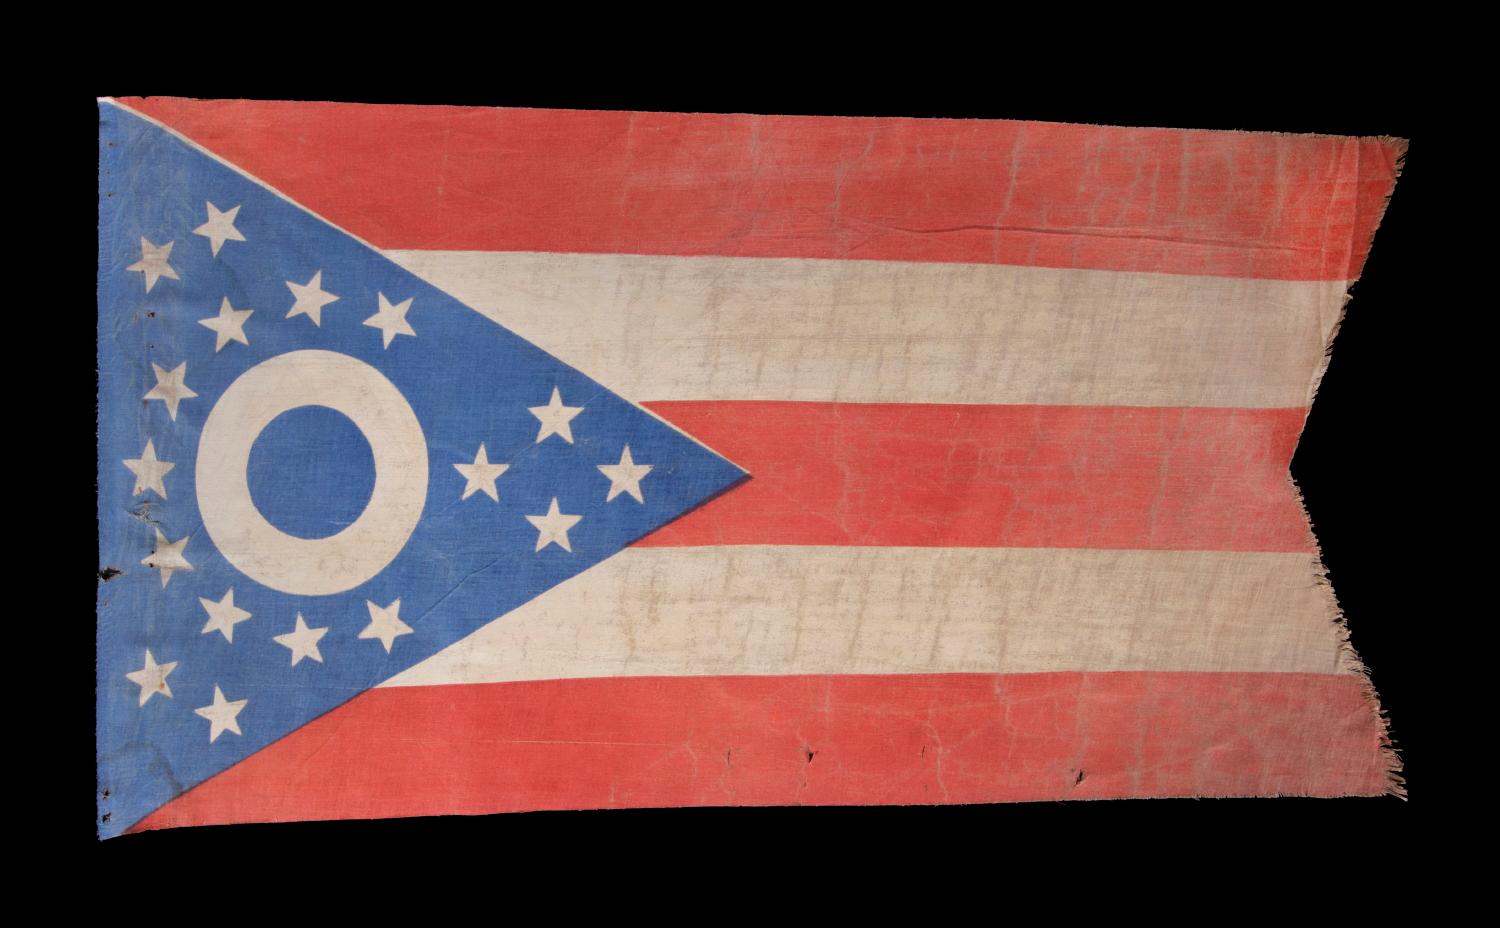 Early Ohio state flag with a blue disc inside the buckeye, circa 1902-1915, an extremely rare and beautiful example:

Early state flags fall between very scarce and extraordinarily rare in the antiques marketplace. One primary reason for this is